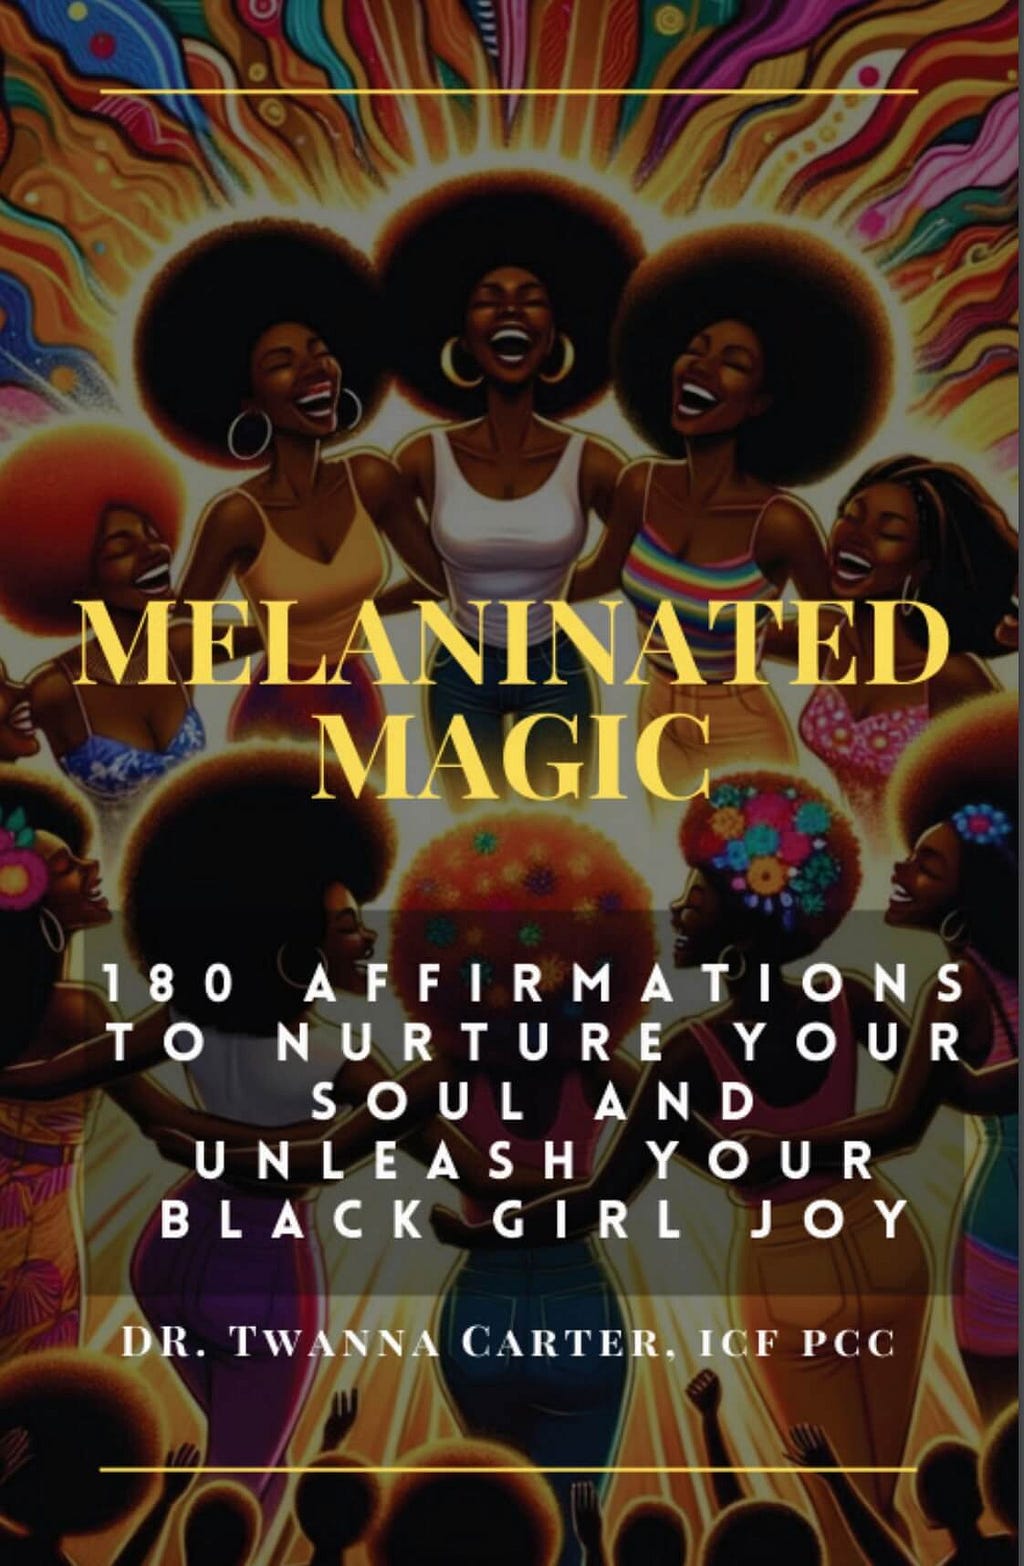 Book cover, Melaninated Magic: 180 Affirmations to Nurture Your Soul and Unleash Your Black Girl Joy; https://amzn.to/48GBVoa